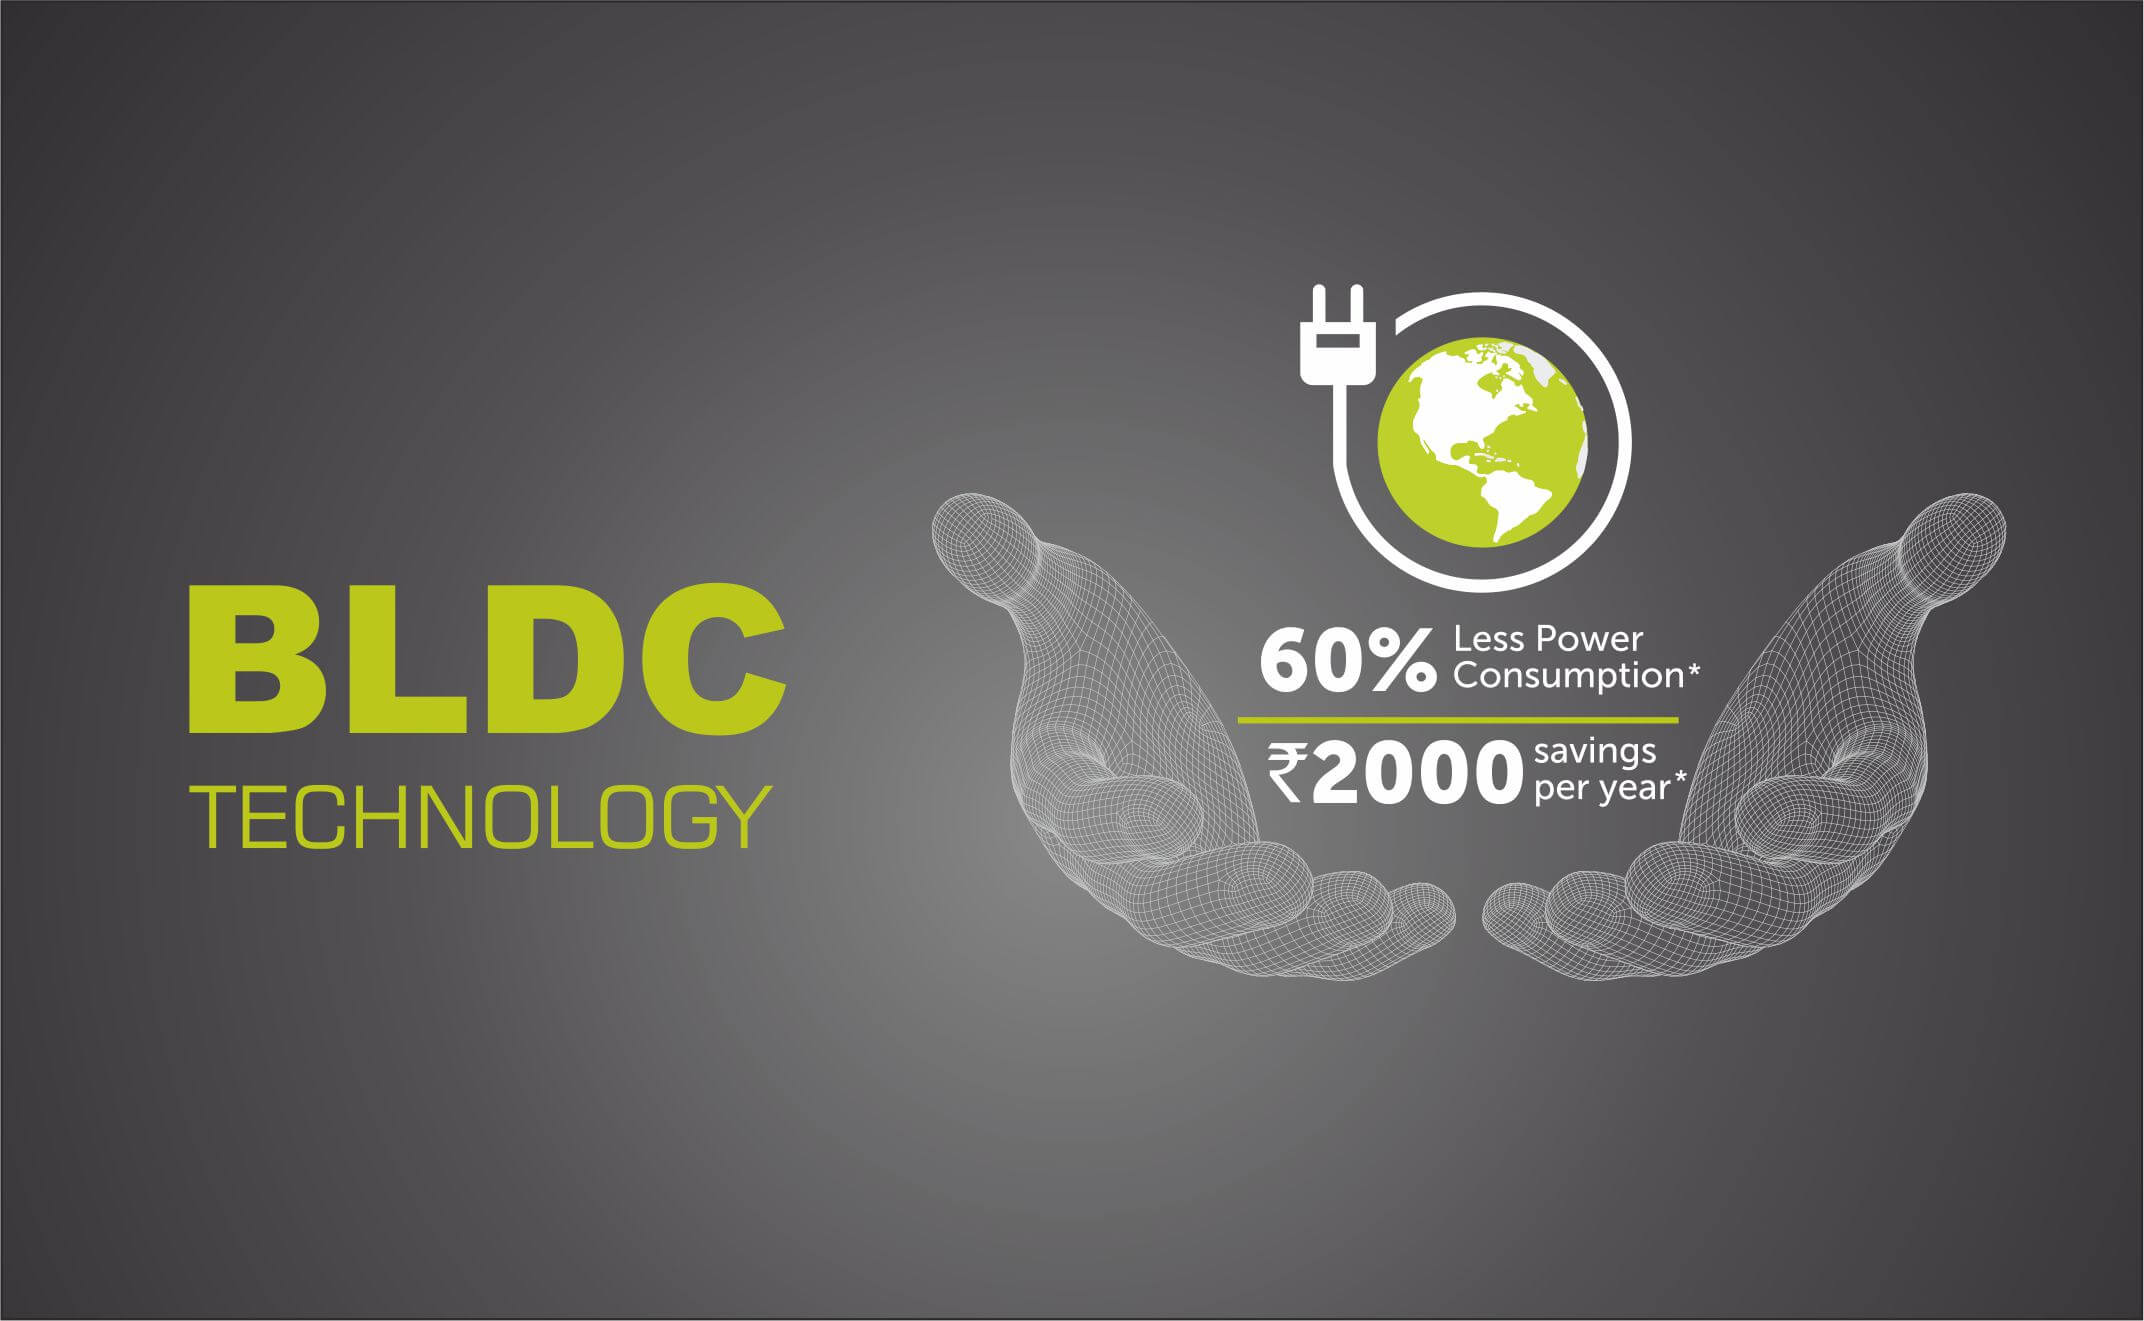 World’s 1st Air Cooler With BLDC Technology